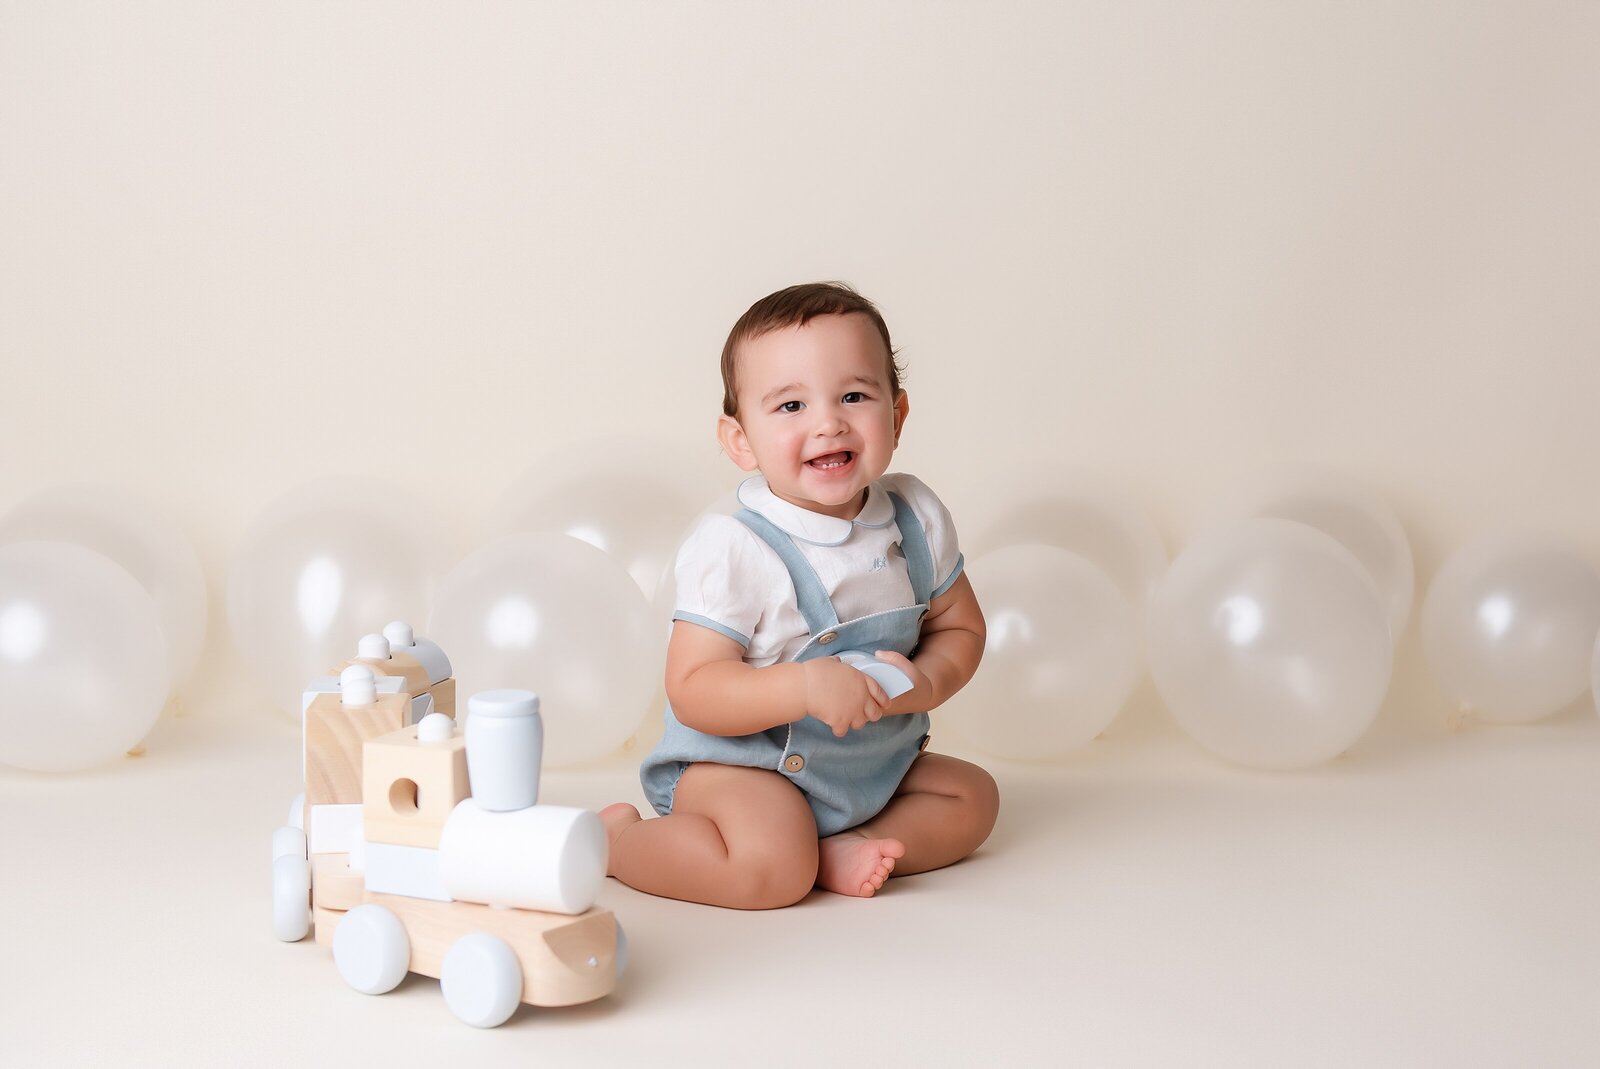 Cake smash photographer near me creates first birthday portraits with balloons and train.